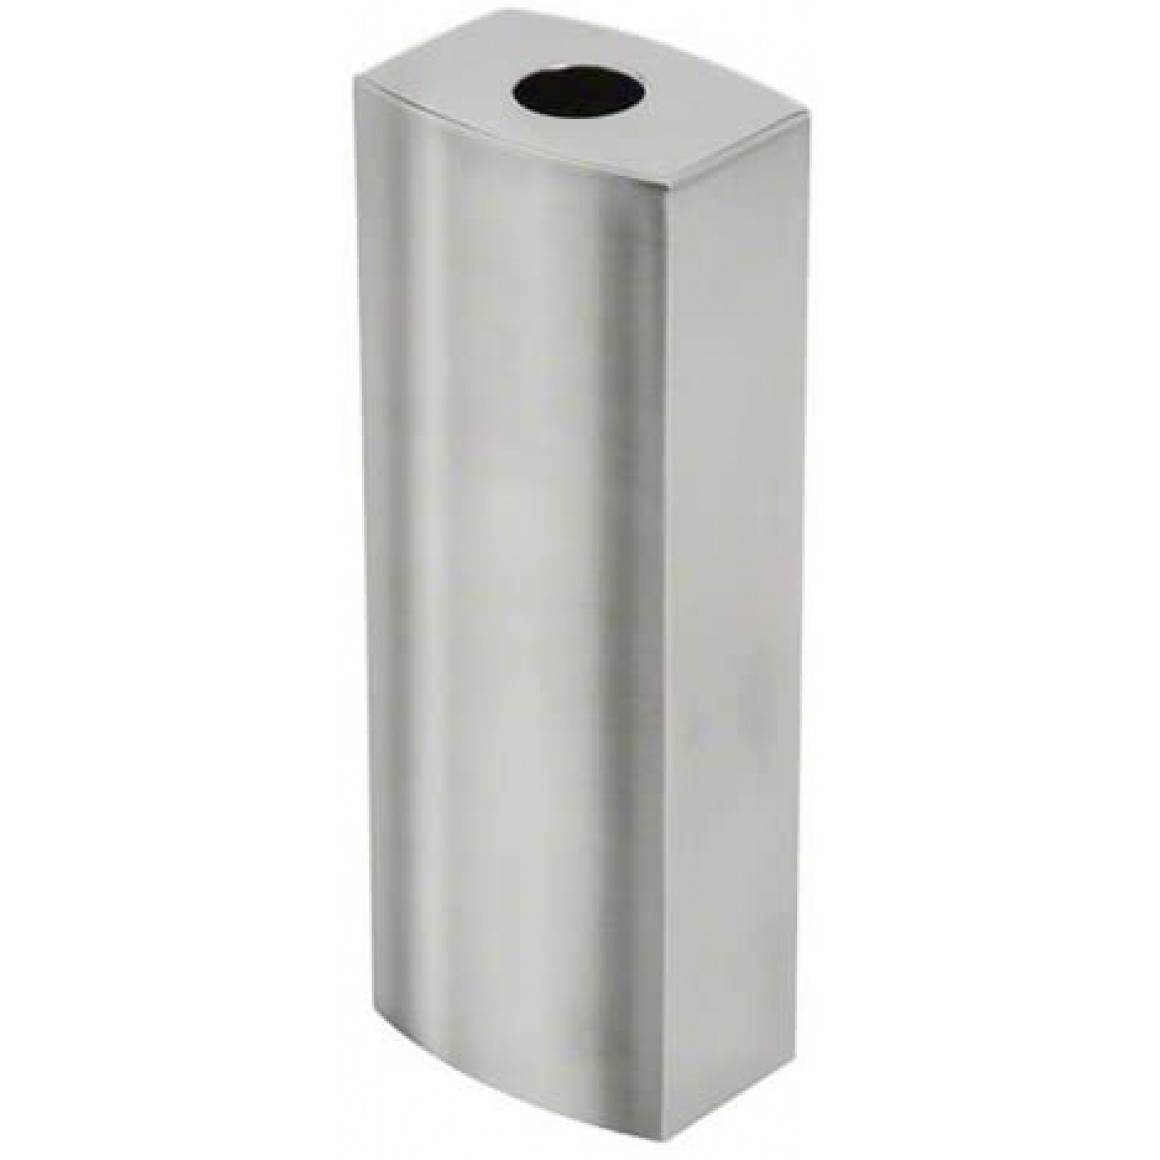 Stainless Steel Bud Vase, Tall Square